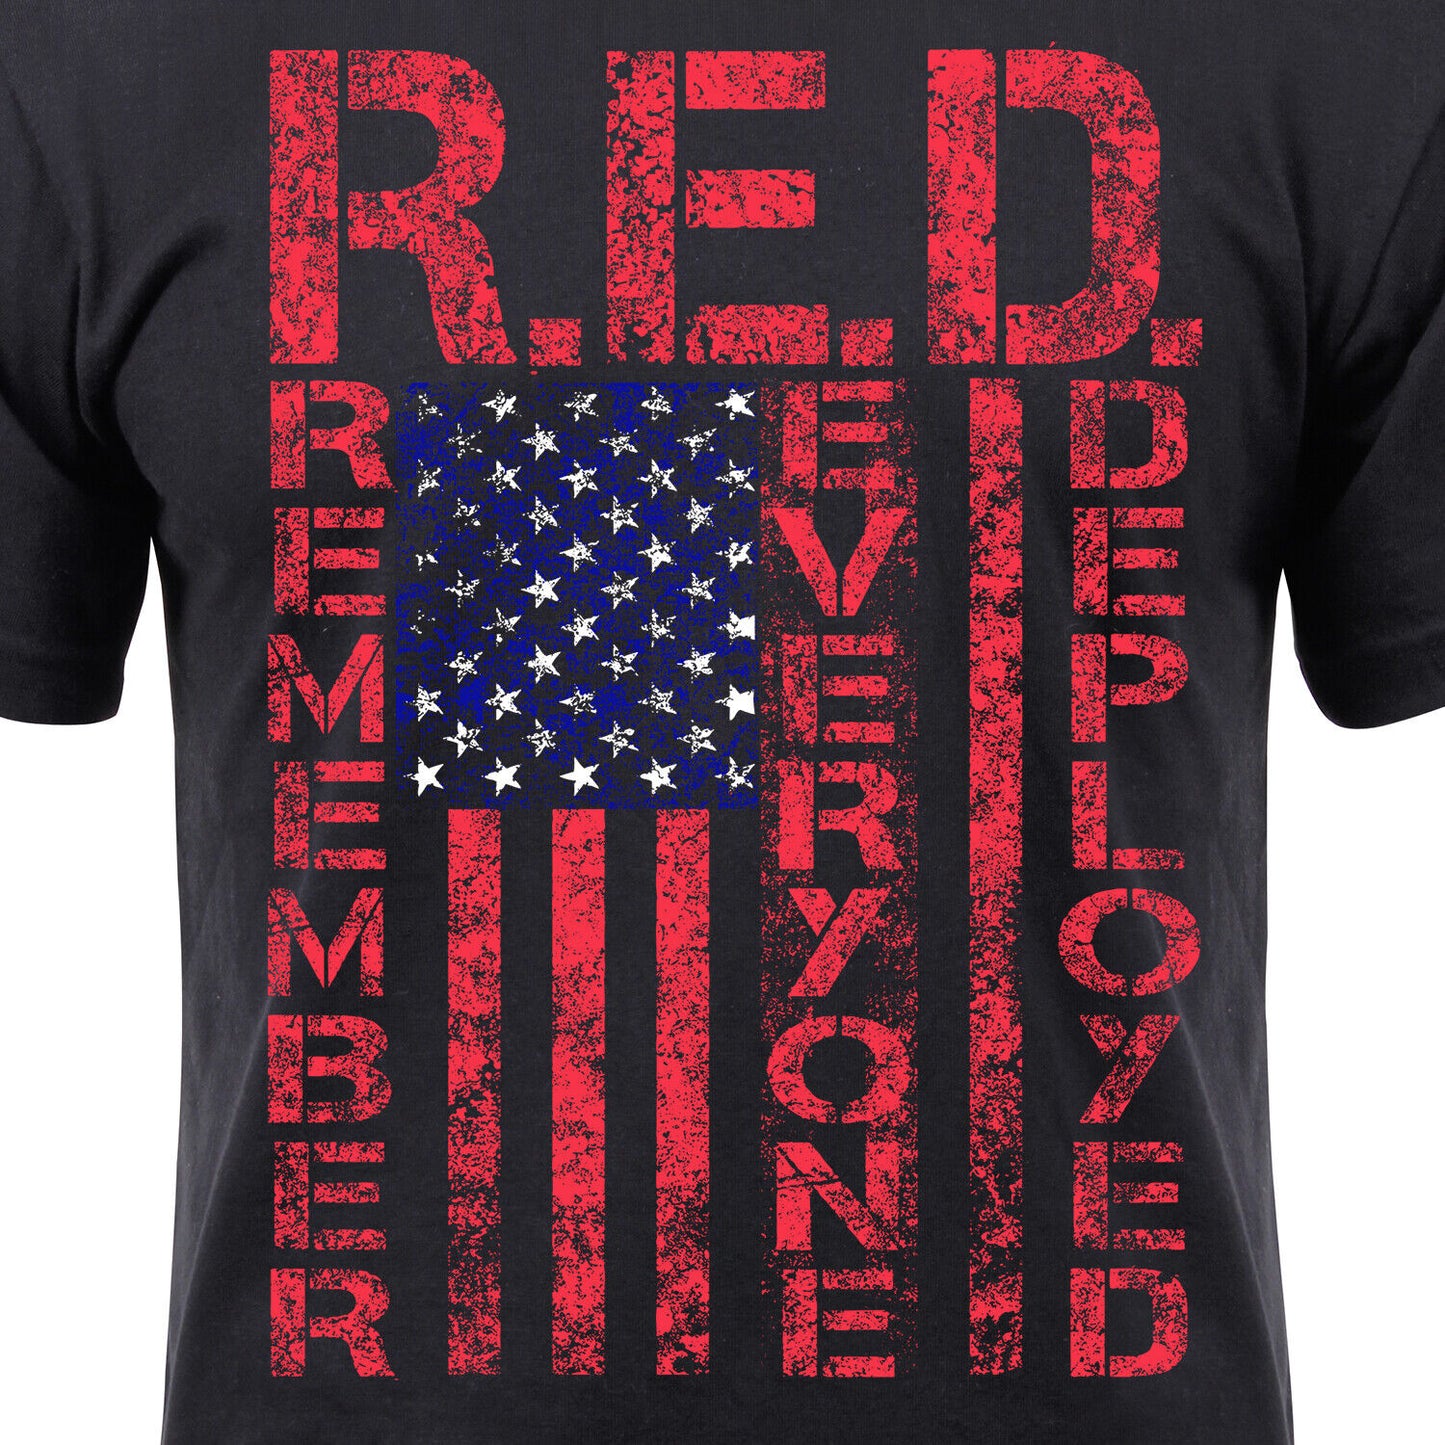 Men's Athletic Fit R.E.D. "Remember Everyone Deployed" T-Shirt In Black